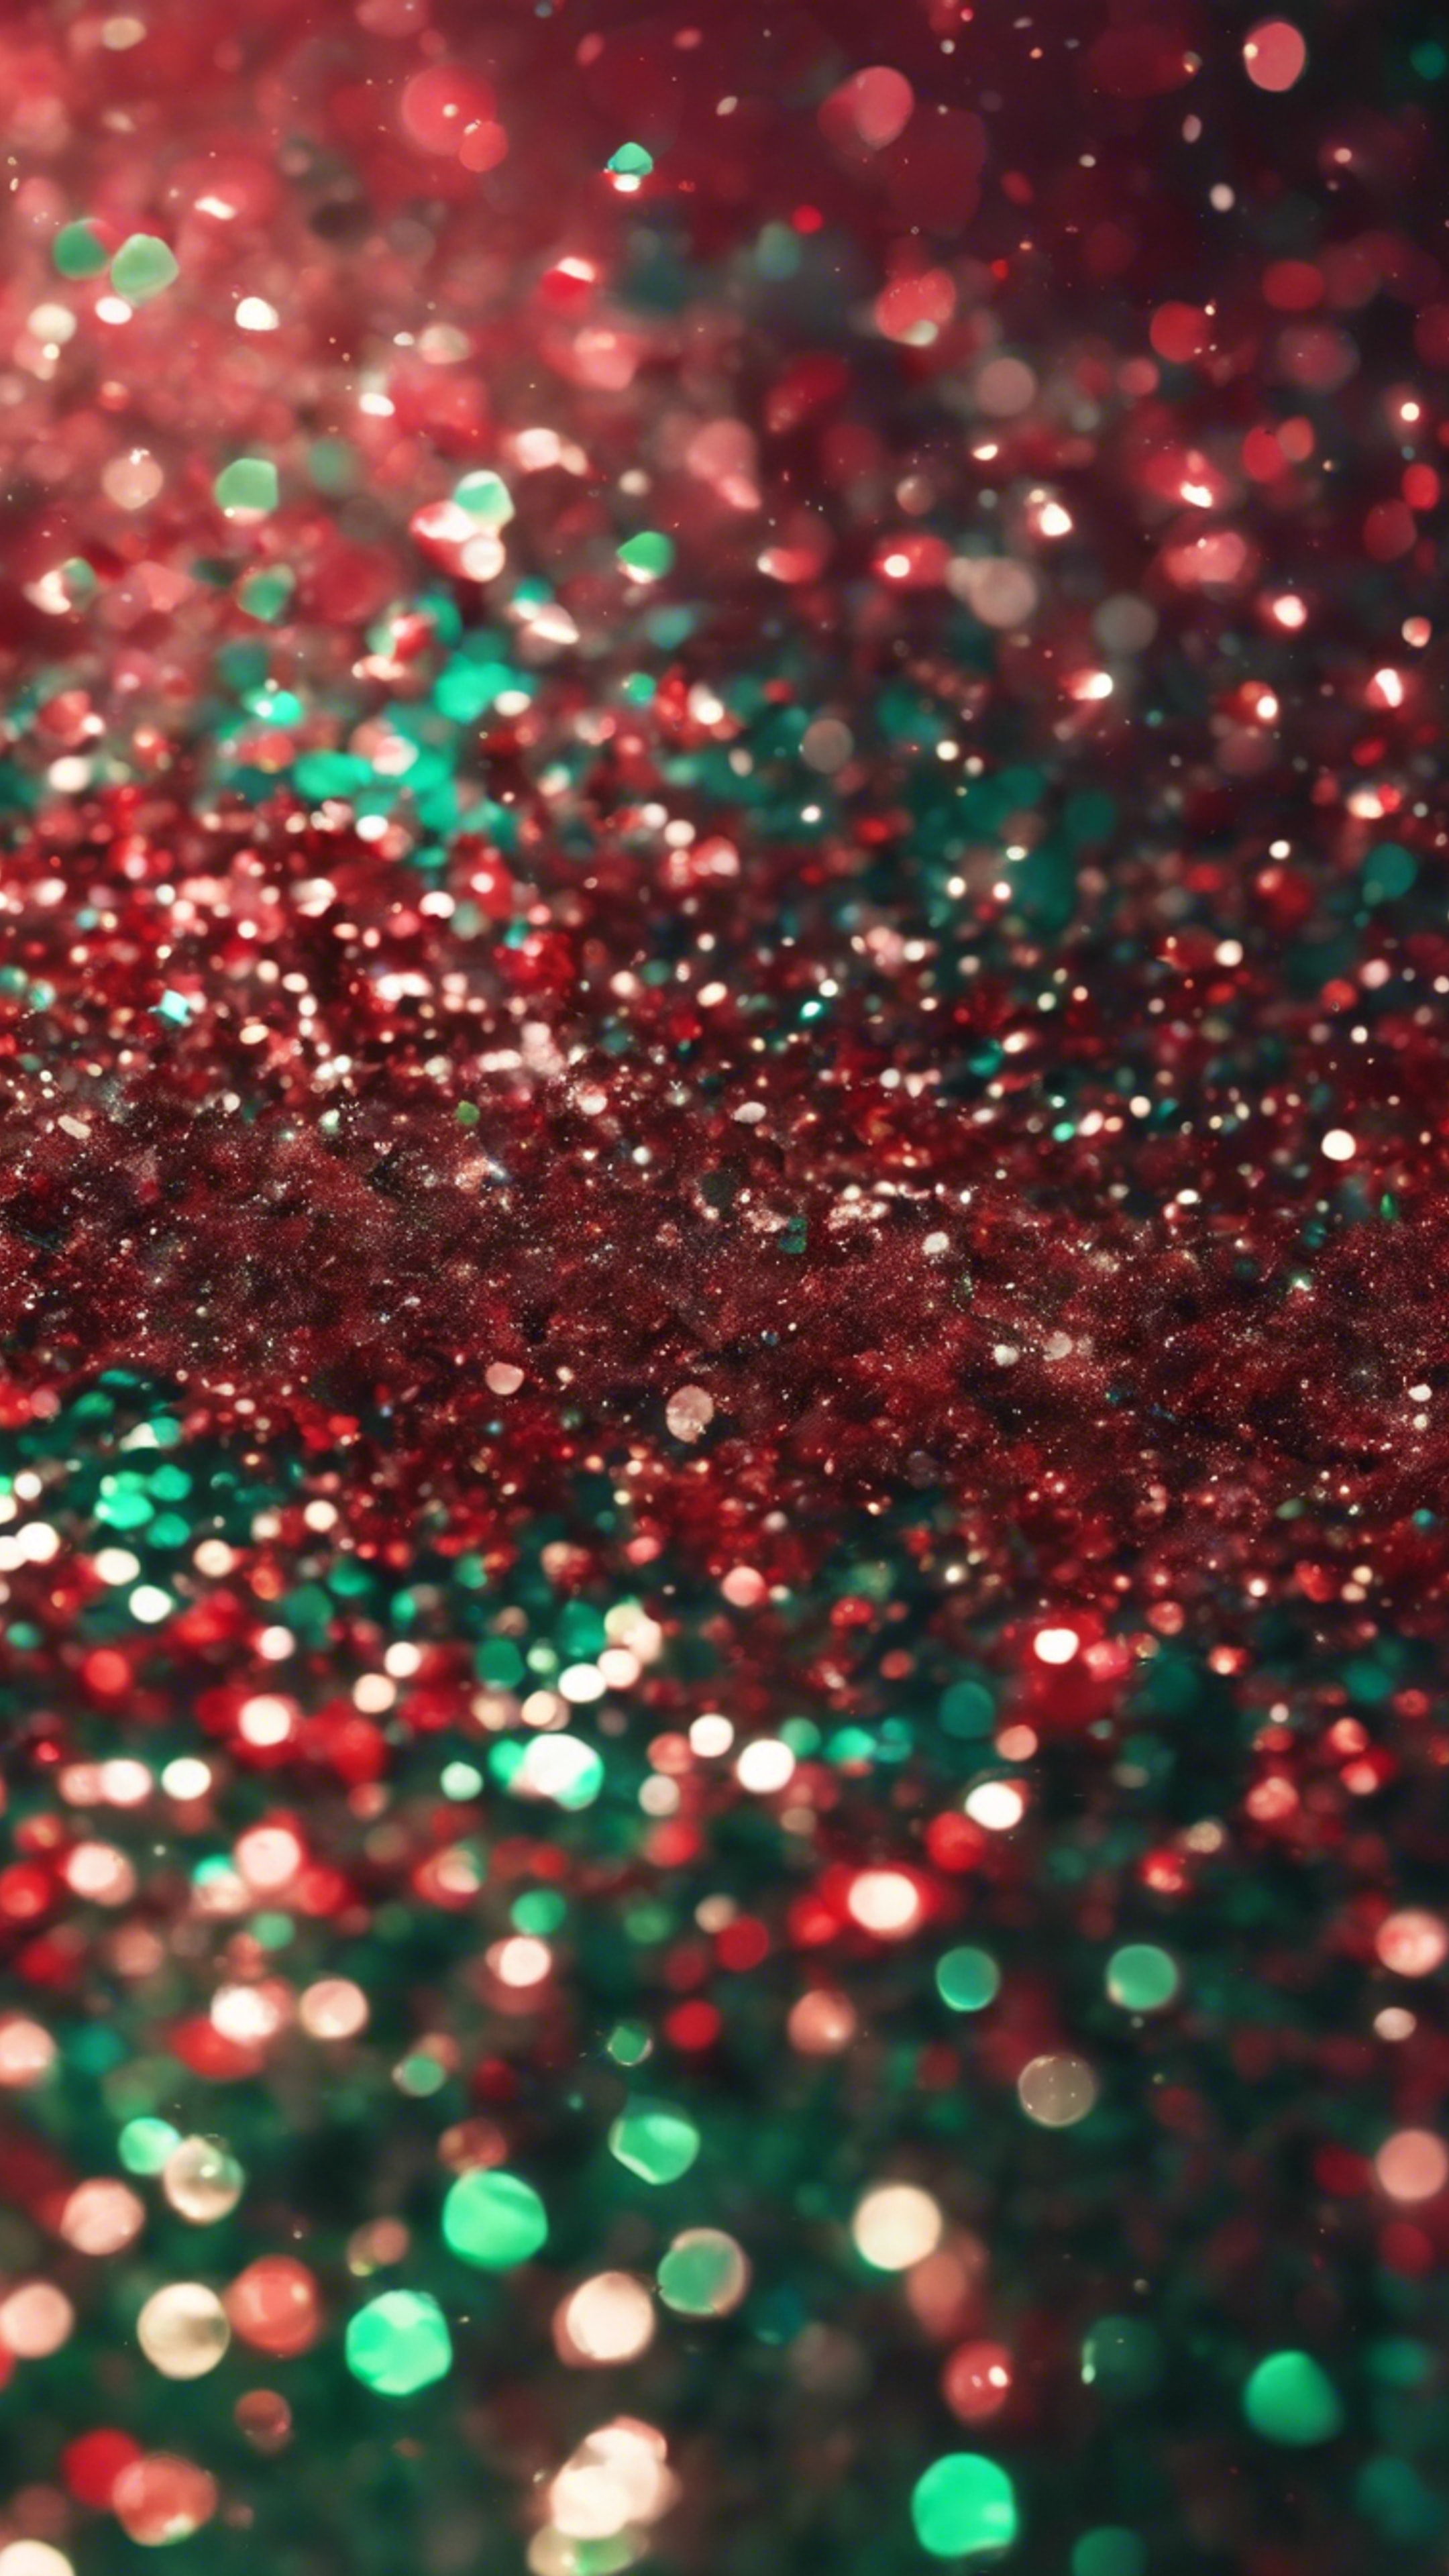 A mix of large and small particles of red and green glitter วอลล์เปเปอร์[305fad2da0d041f9bf26]